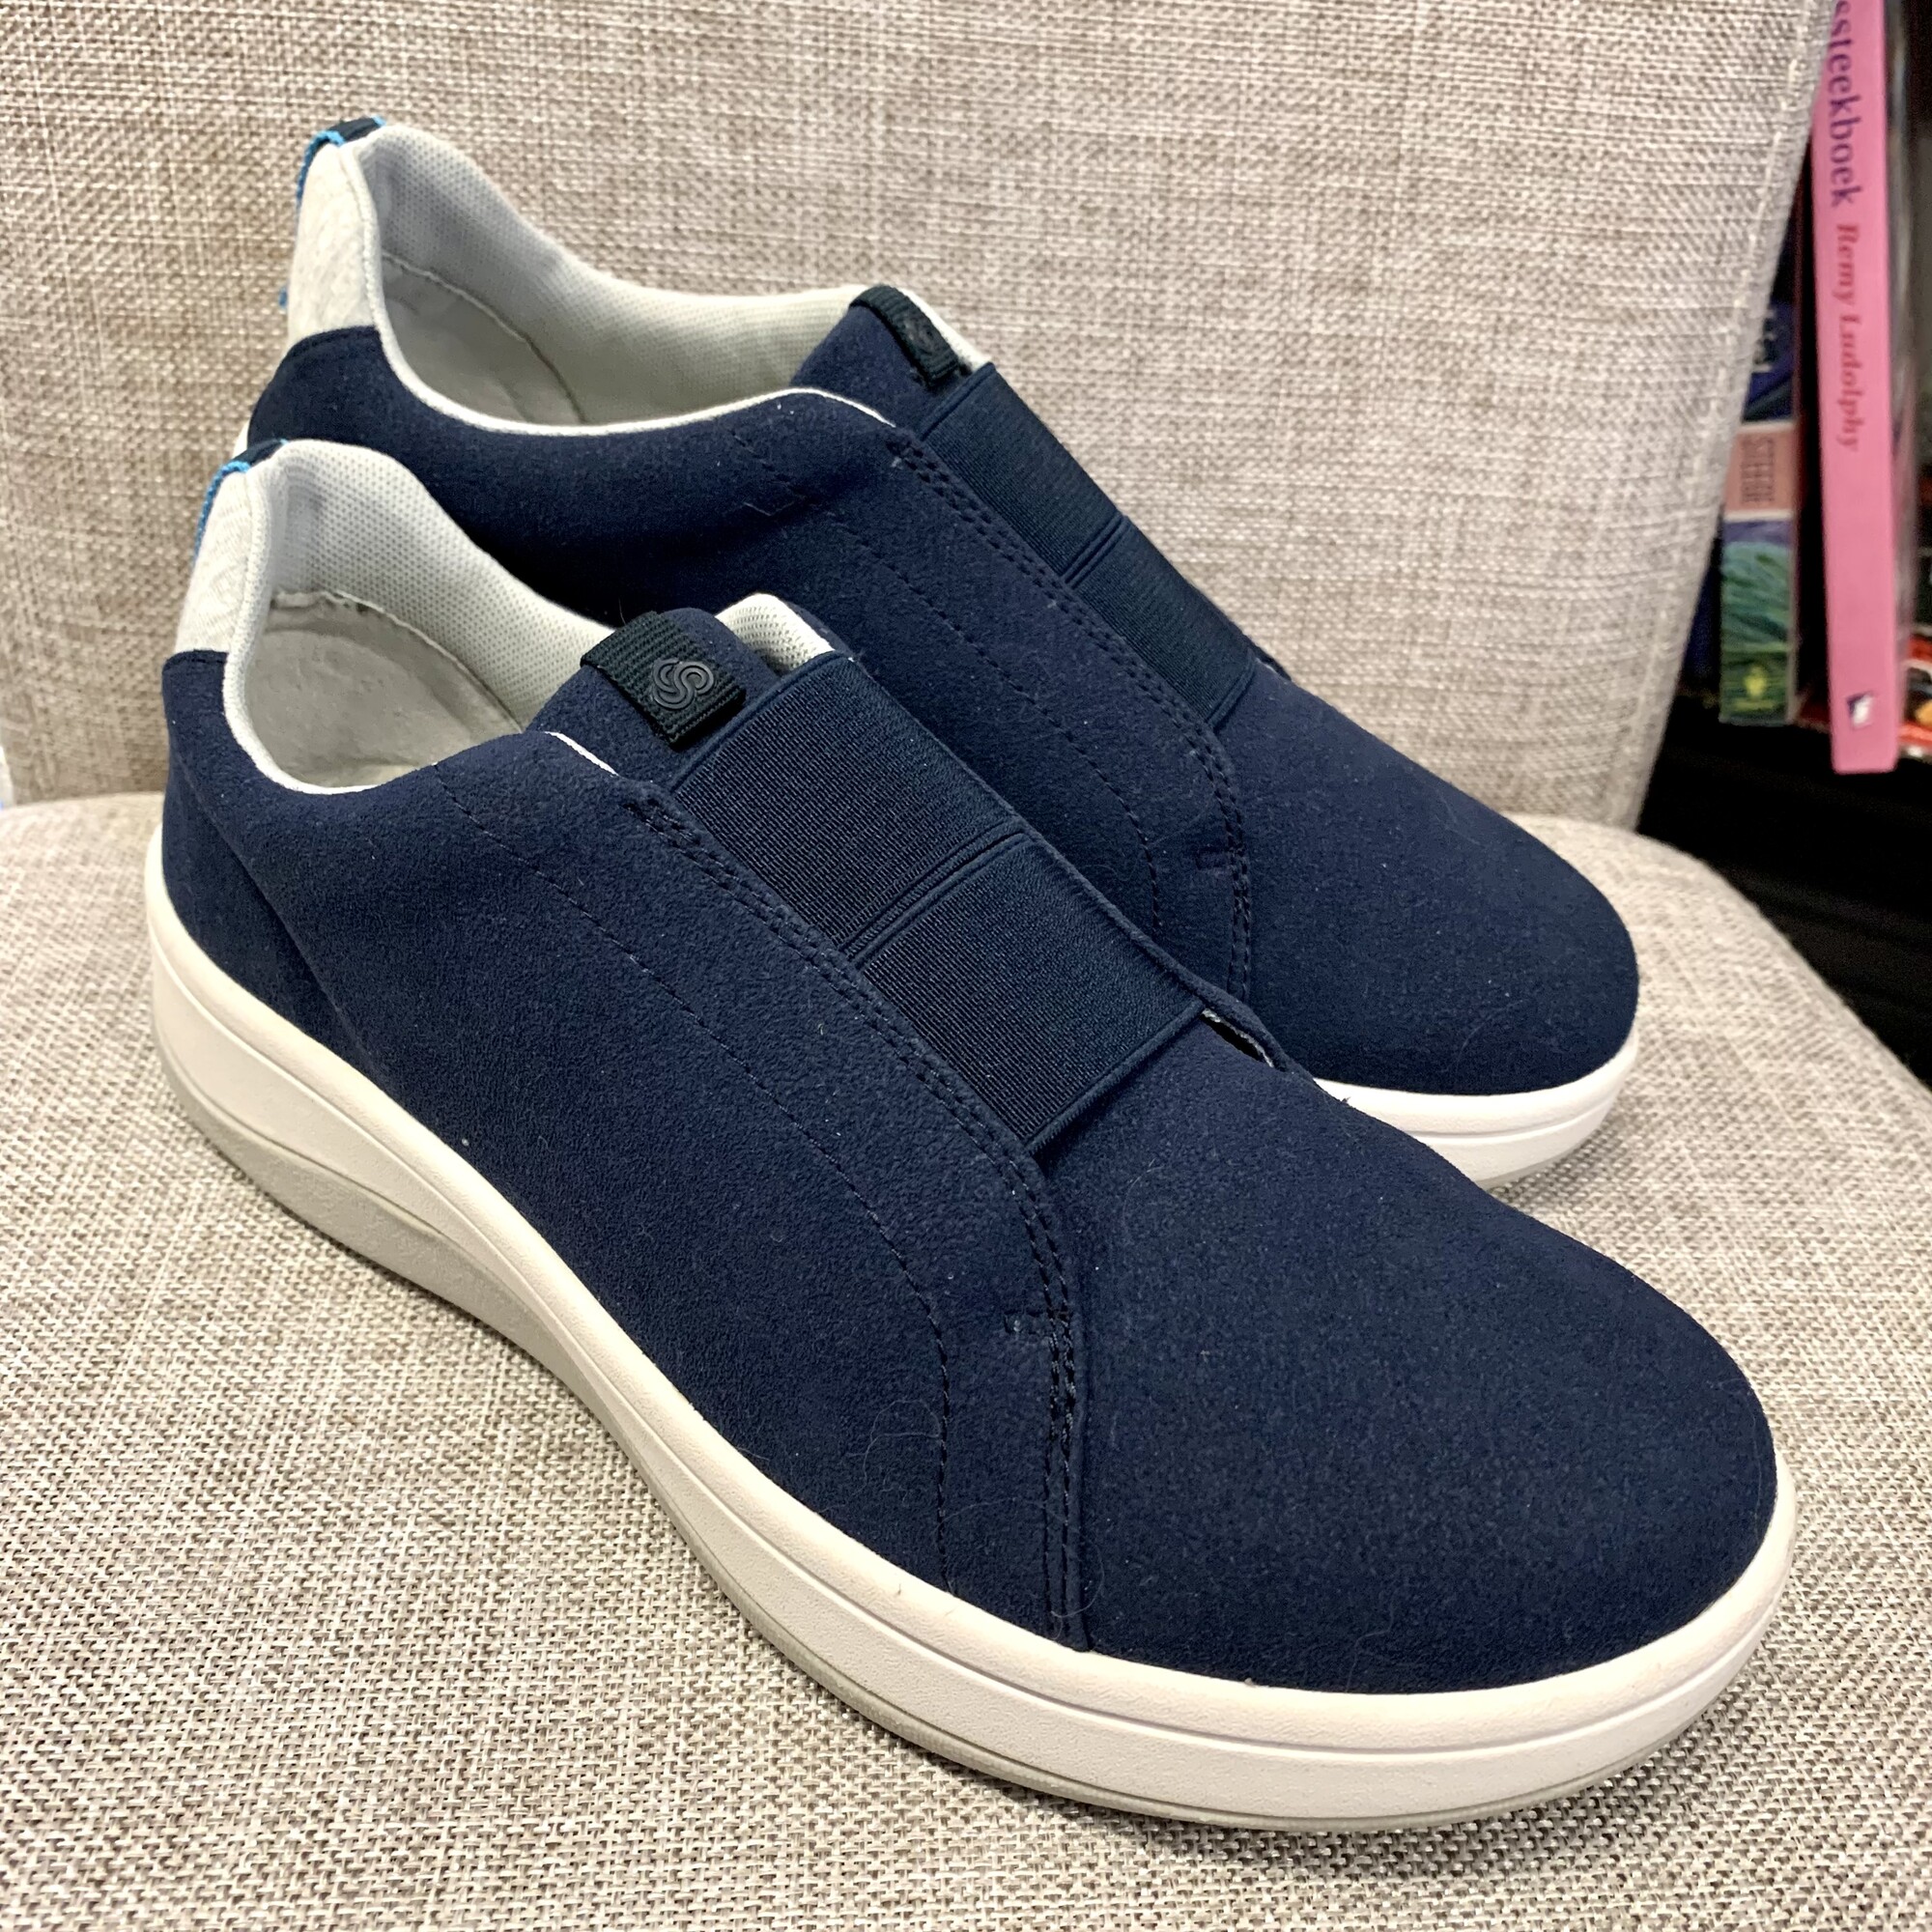 Clarks Cloudsteppers New,
Colour: Navy,
Size: 7.5,
Come with Box.

Please contact the store if you want this item shipped.